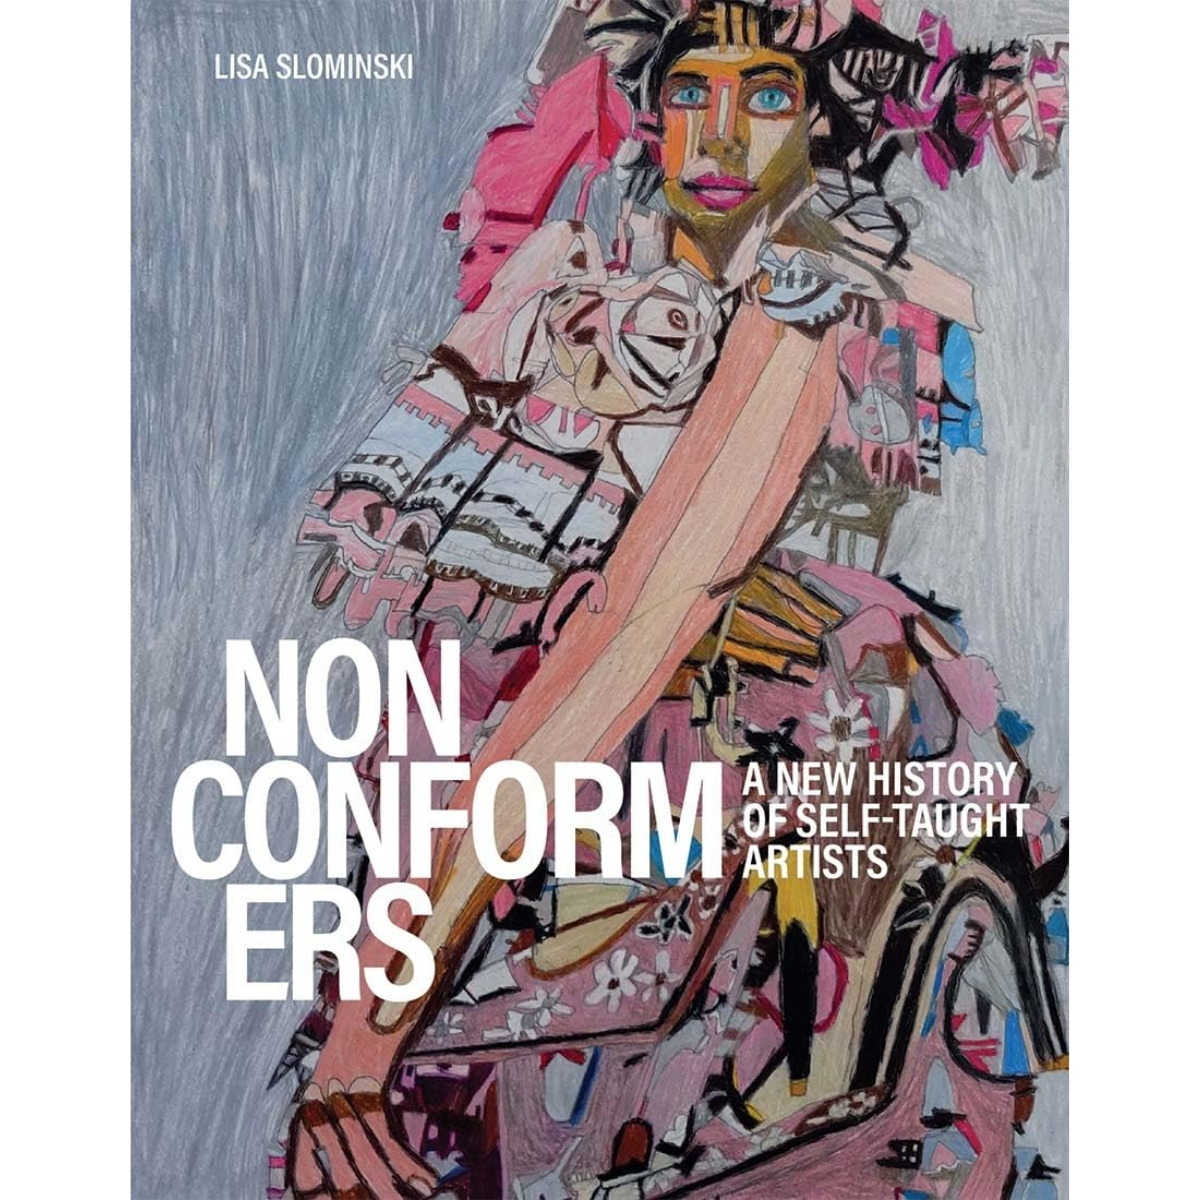 Nonconformers: A New History of Self-Taught Artists